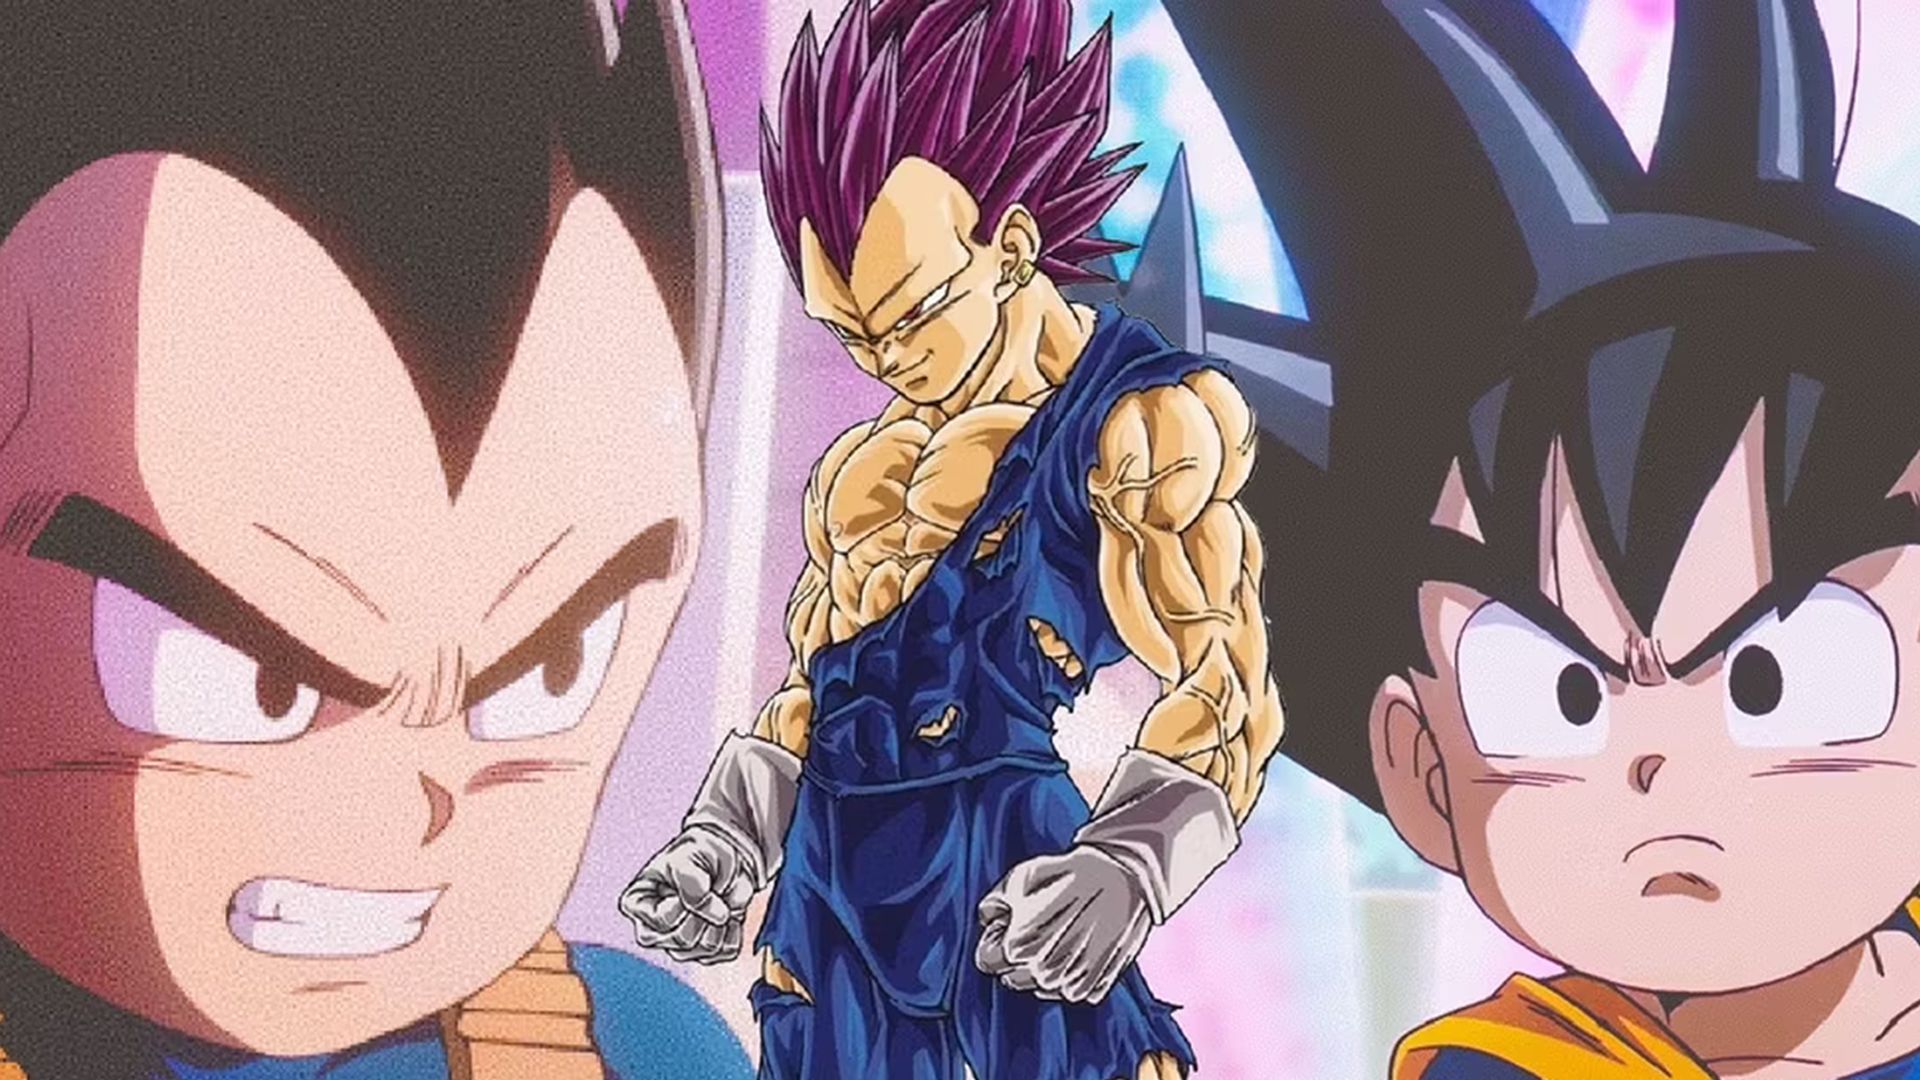 Will Dragon Ball Daima have new transformations? Anime insider